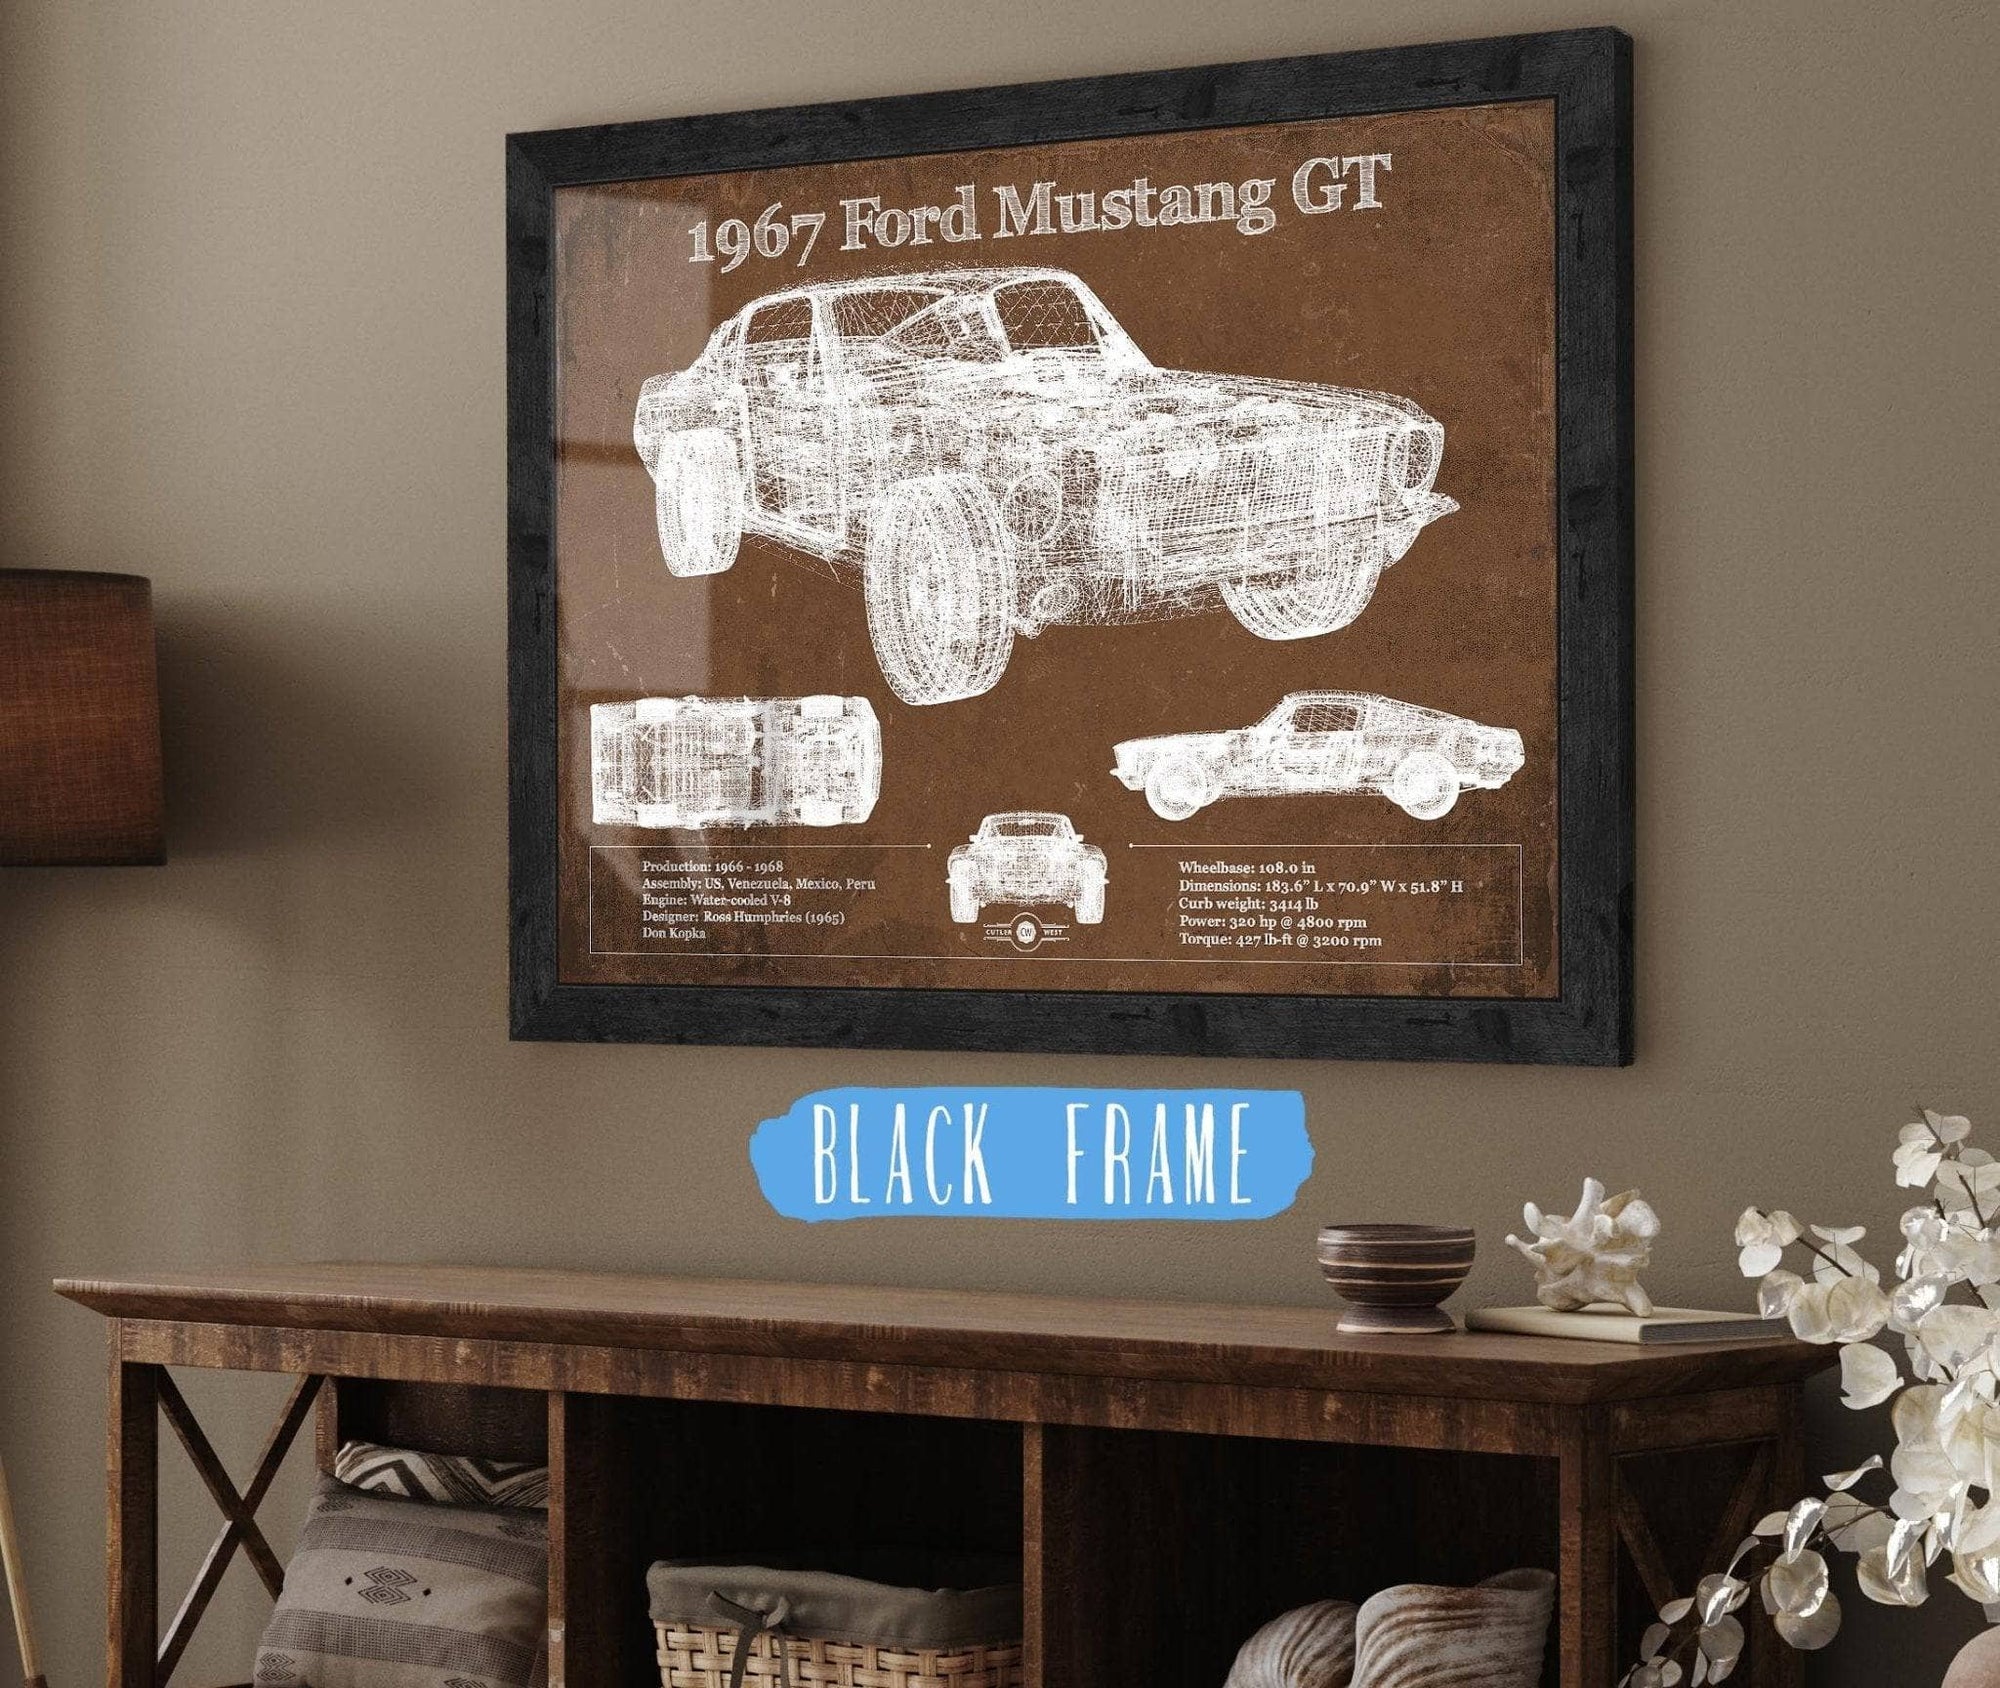 Cutler West Ford Collection 14" x 11" / Black Frame 1967 Ford Mustang GT Blueprint Vintage Auto Print 933350035_34087